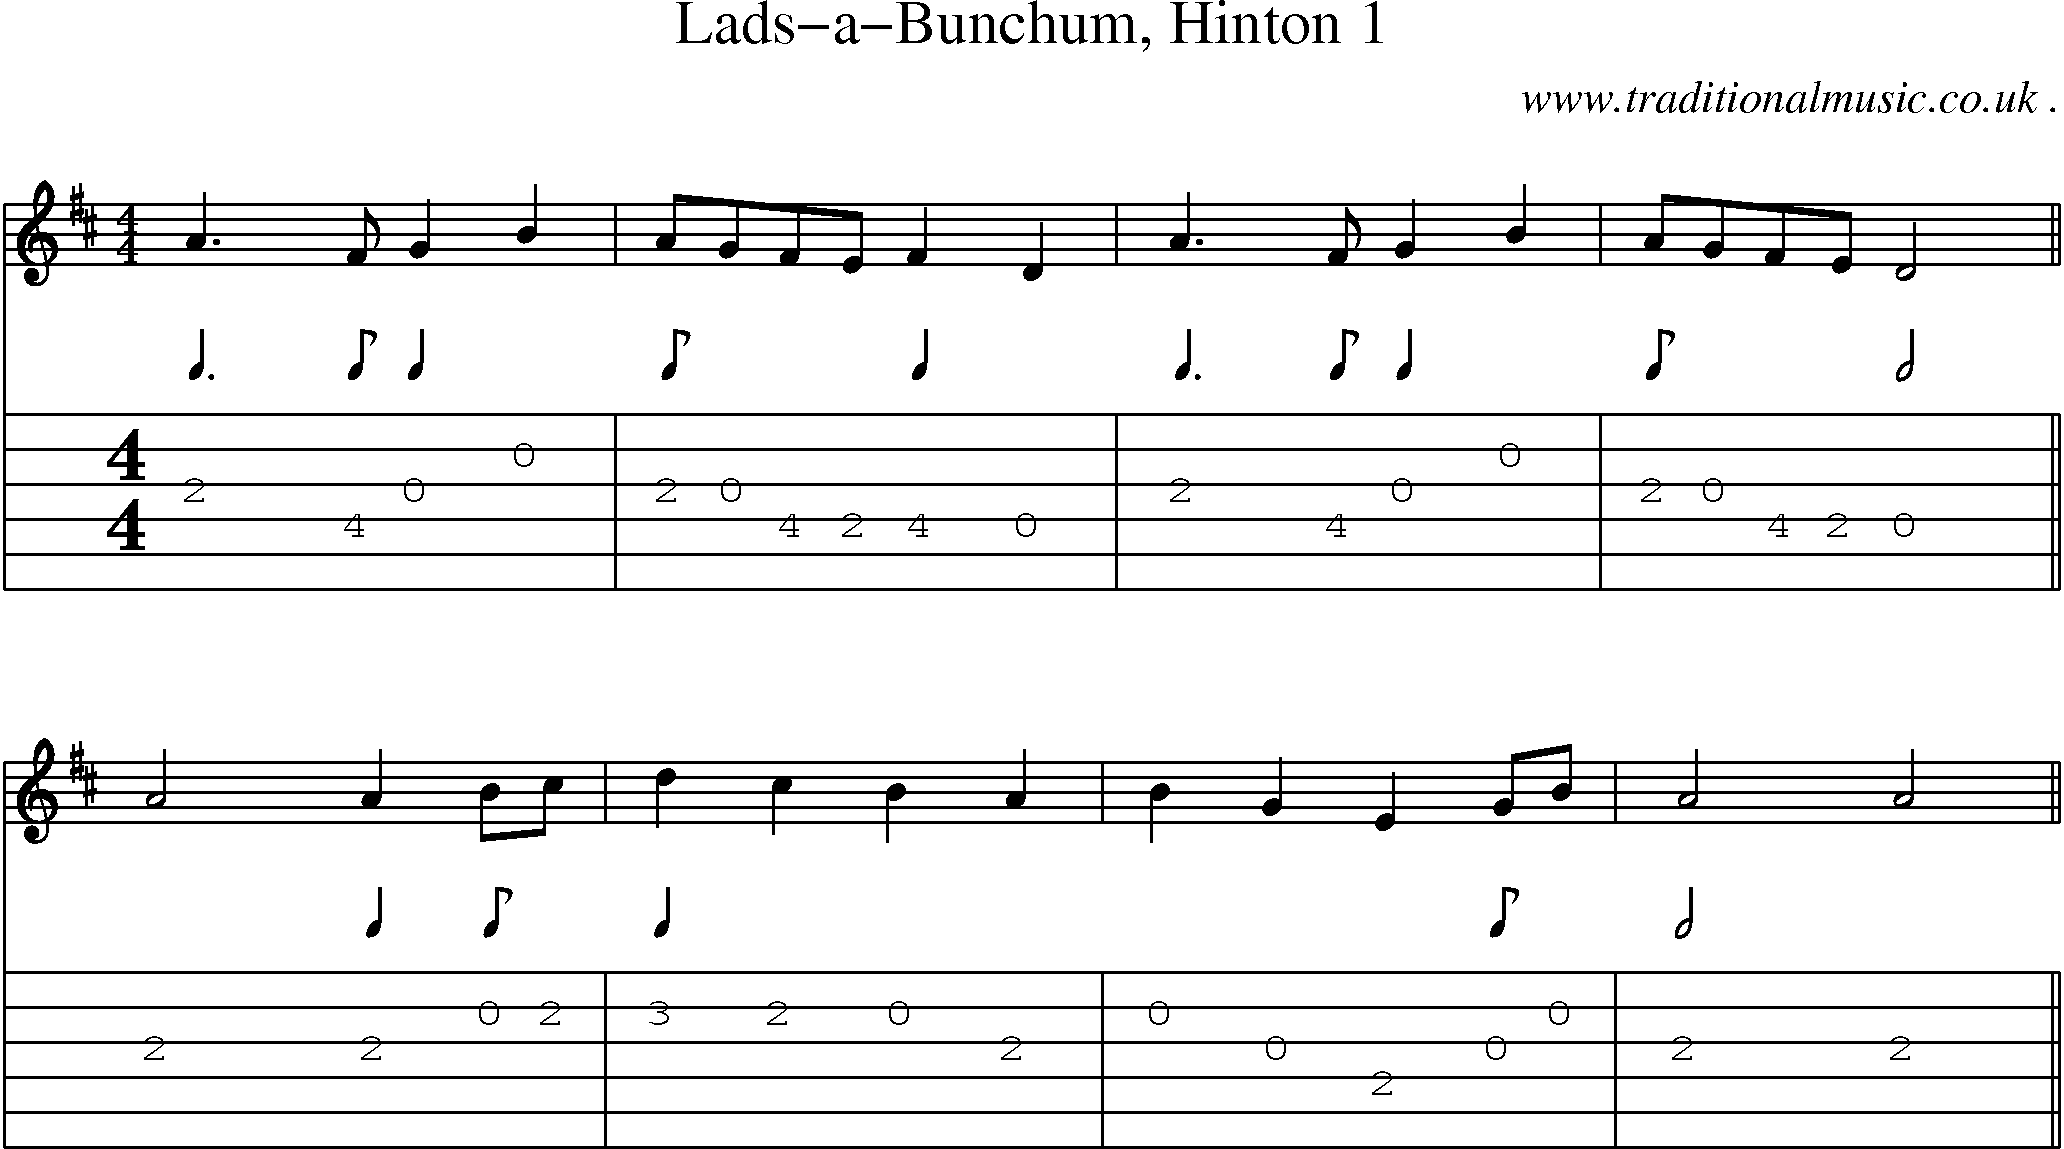 Sheet-Music and Guitar Tabs for Lads-a-bunchum Hinton 1